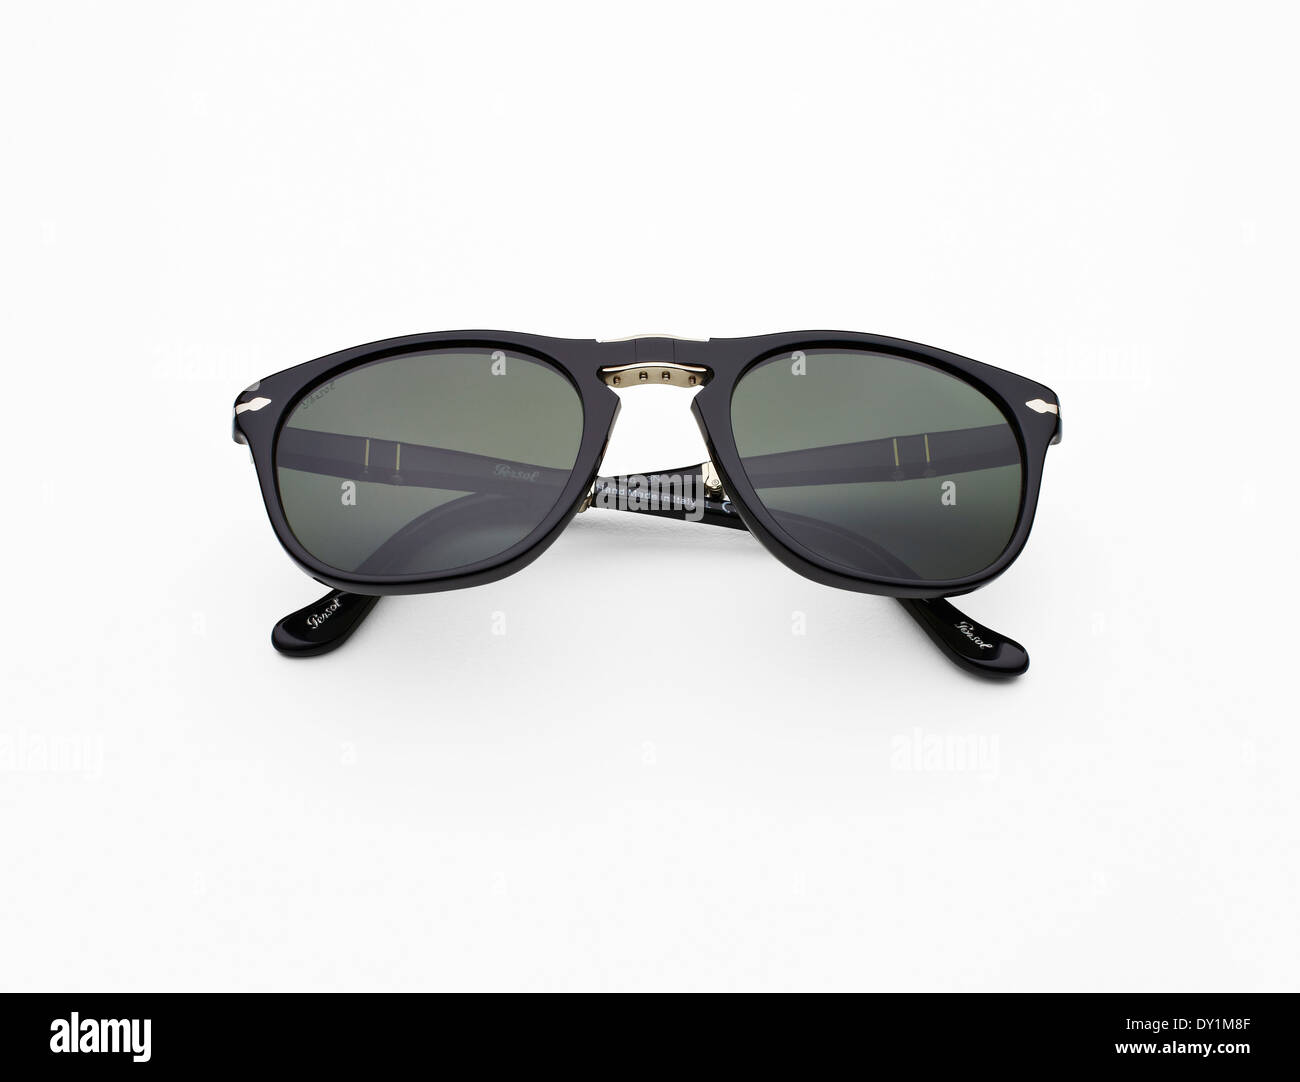 Persol folding sunglasses still life photograph against a white background  Stock Photo - Alamy